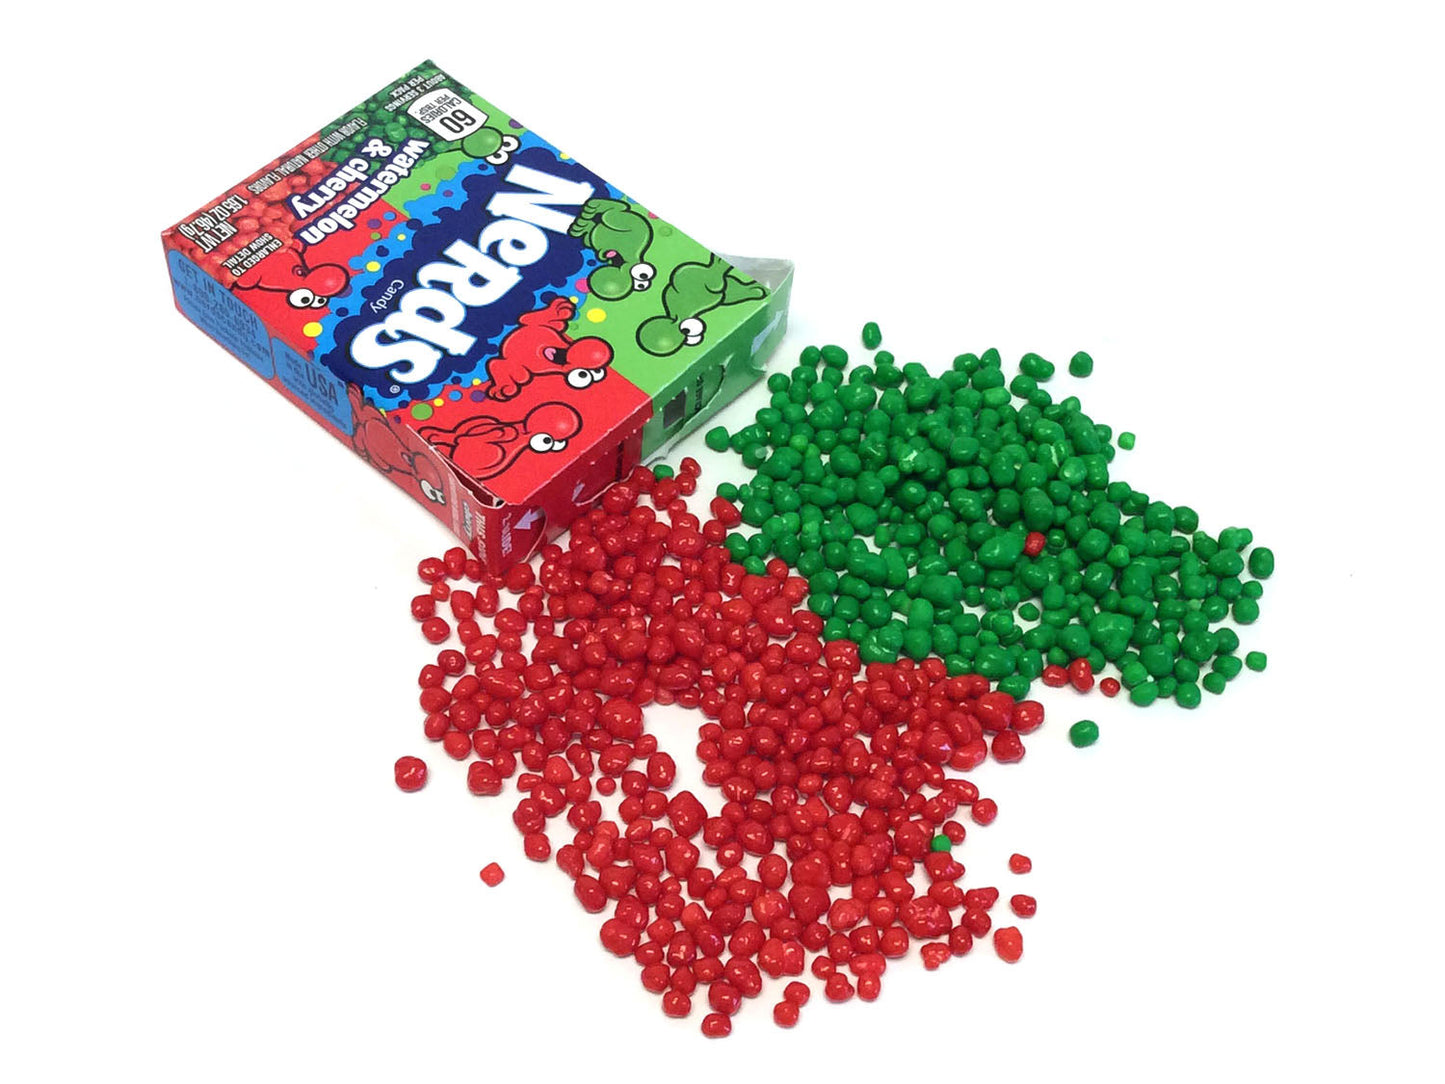 Nerds - Watermelon and Cherry - open